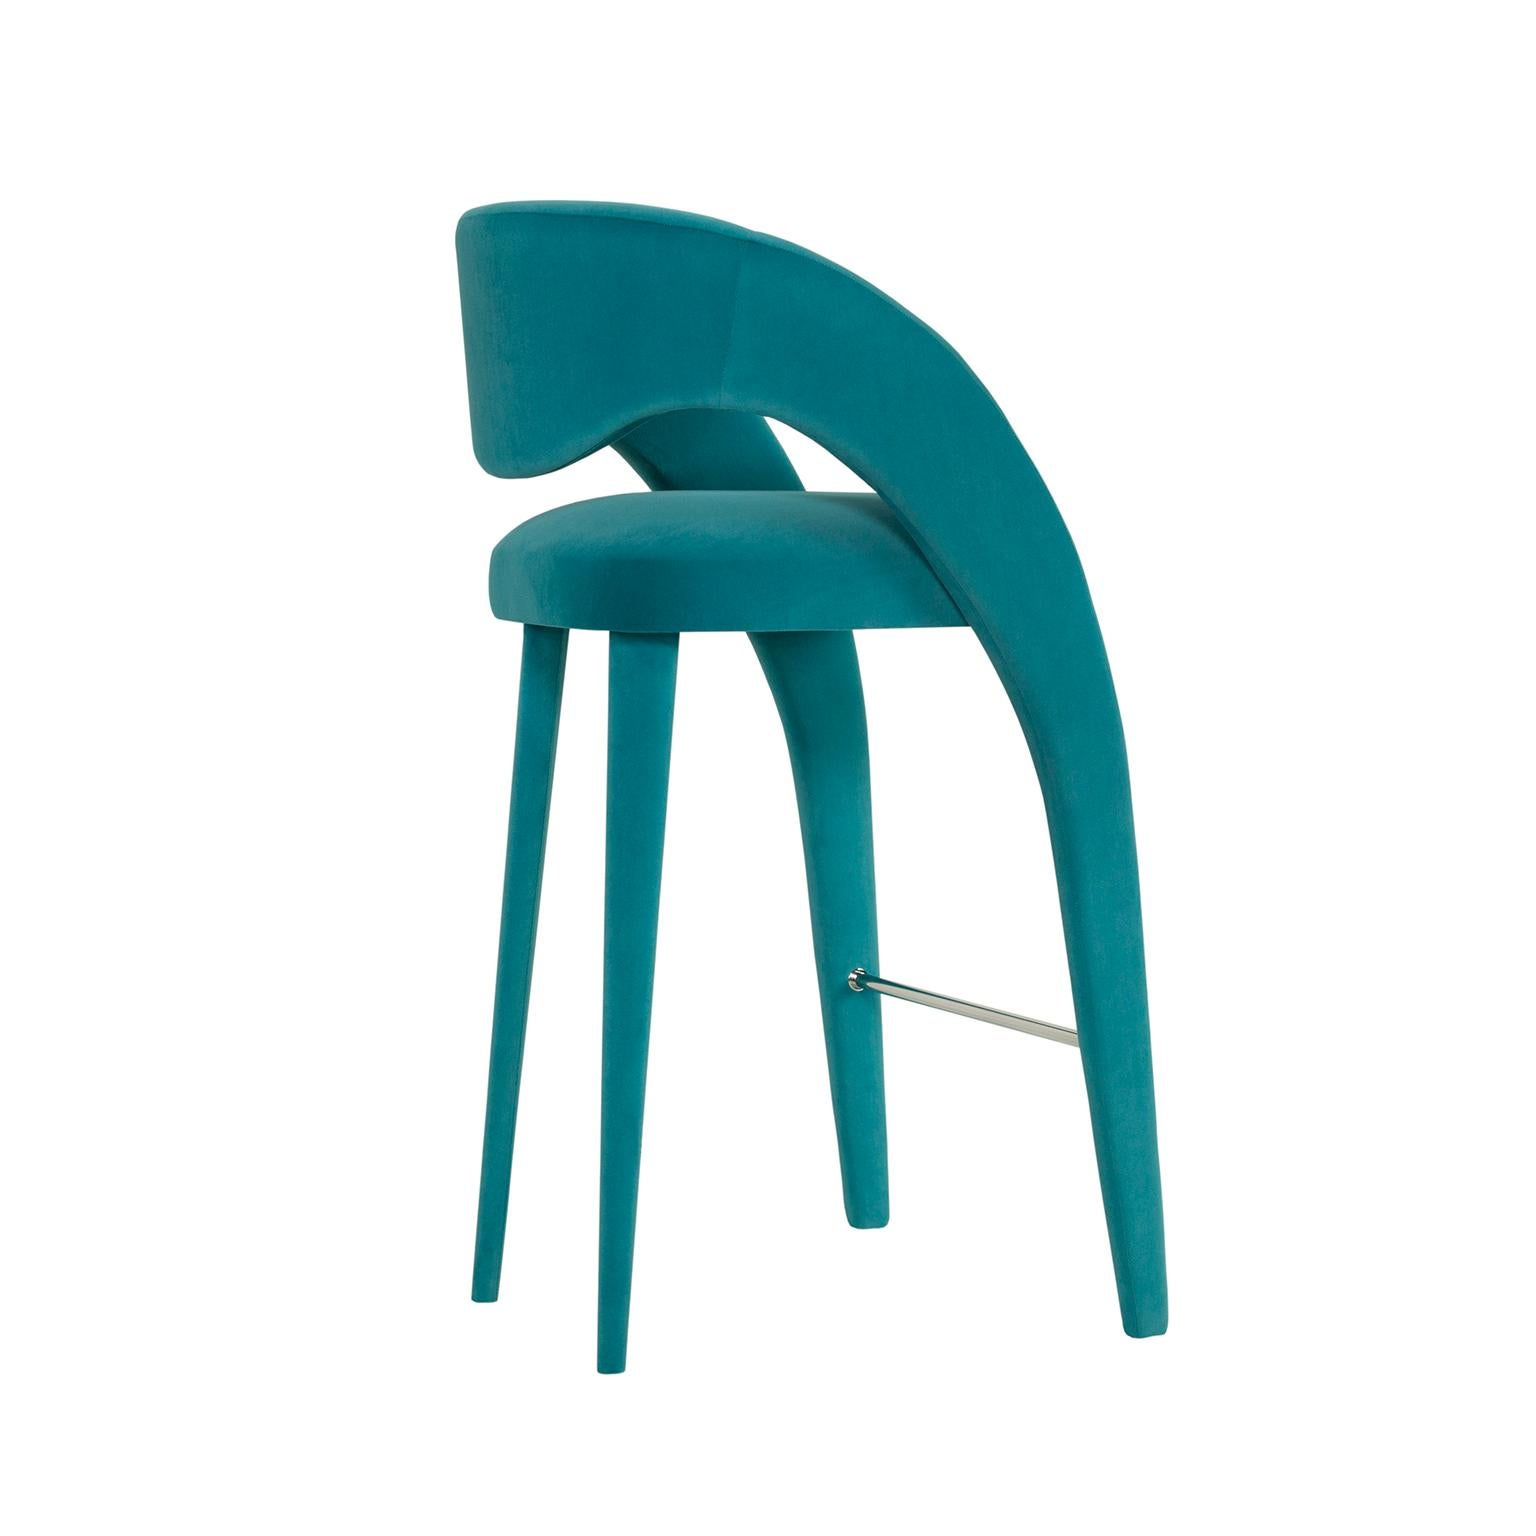 Laurence chair, Contemporary Collection, Handcrafted in Portugal - Europe by Greenapple.

Designed by Rute Martins for the Contemporary Collection, the Laurence bar stool was created with the artistic intent of reimagining the image of women within